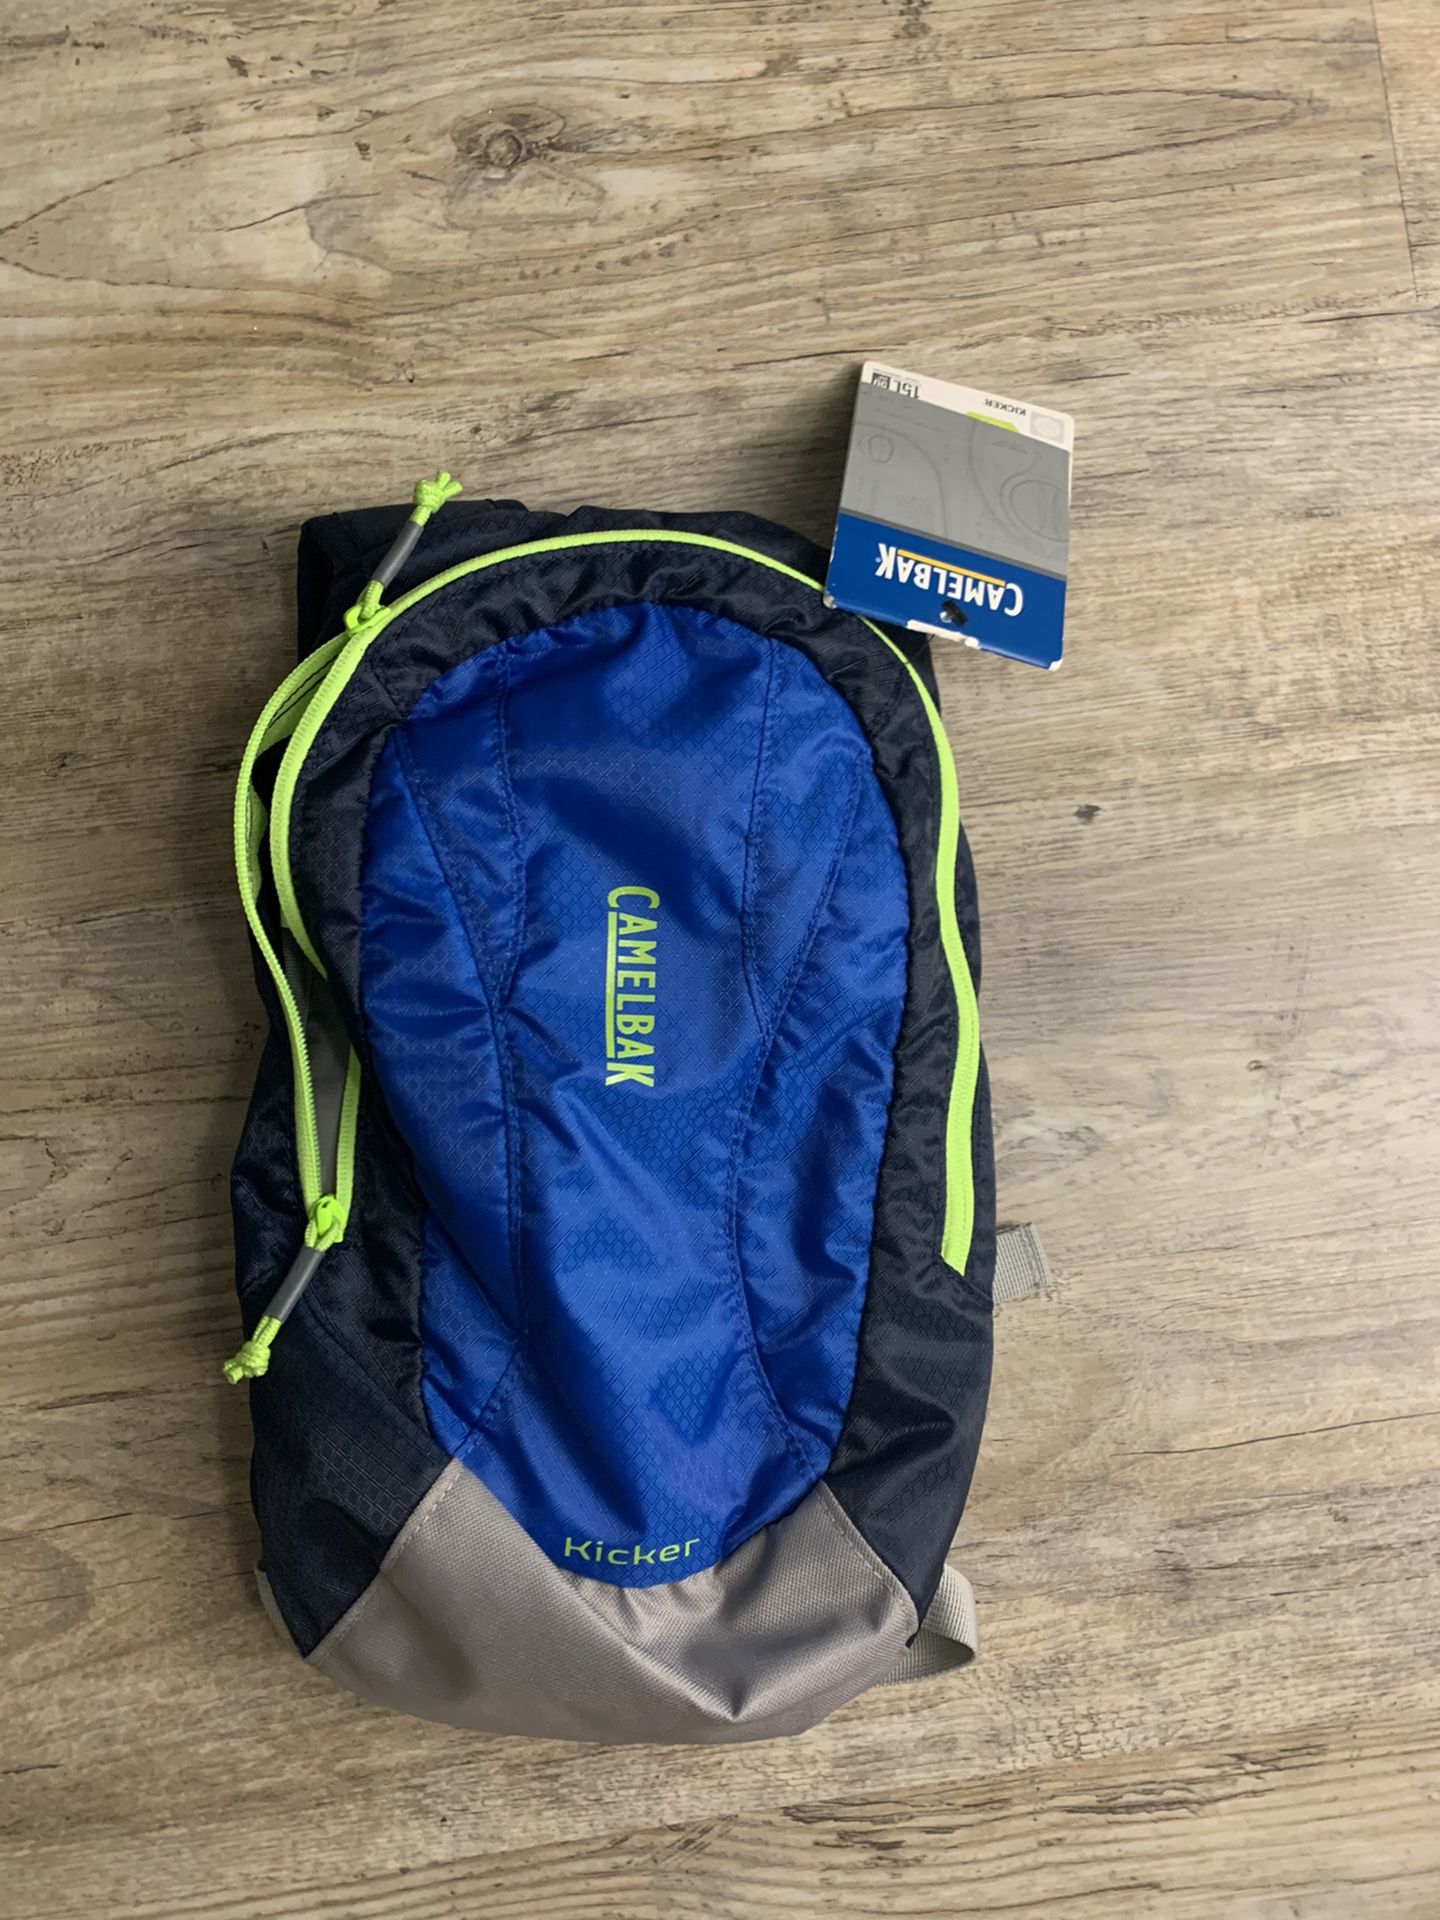 Camelbak 1.5 L backpack completely new unused